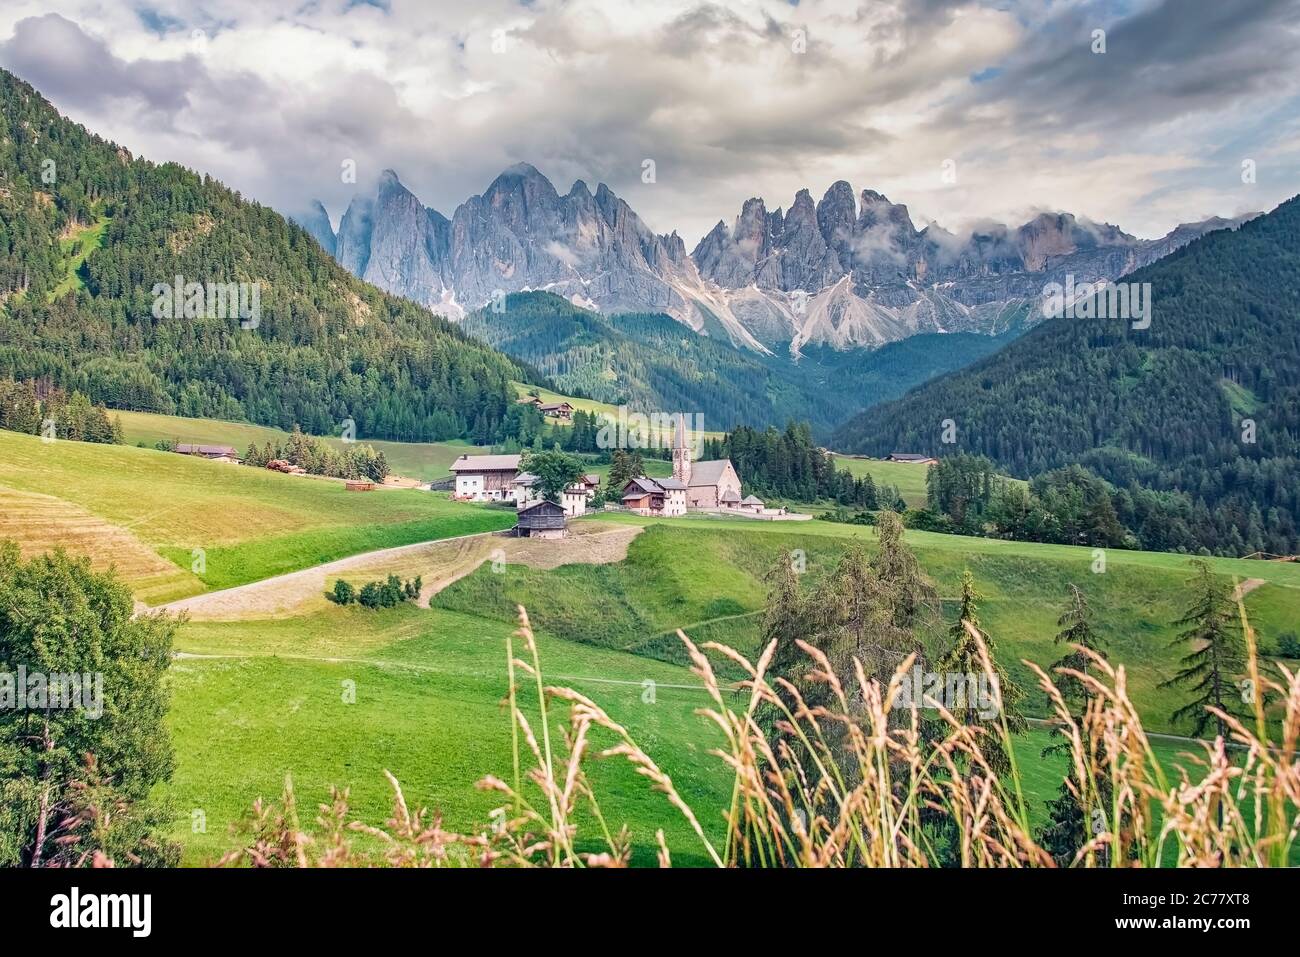 Santa Maddalena village with beautiful Dolomites mountains in the background, Val di Funes valley, Italy Stock Photo